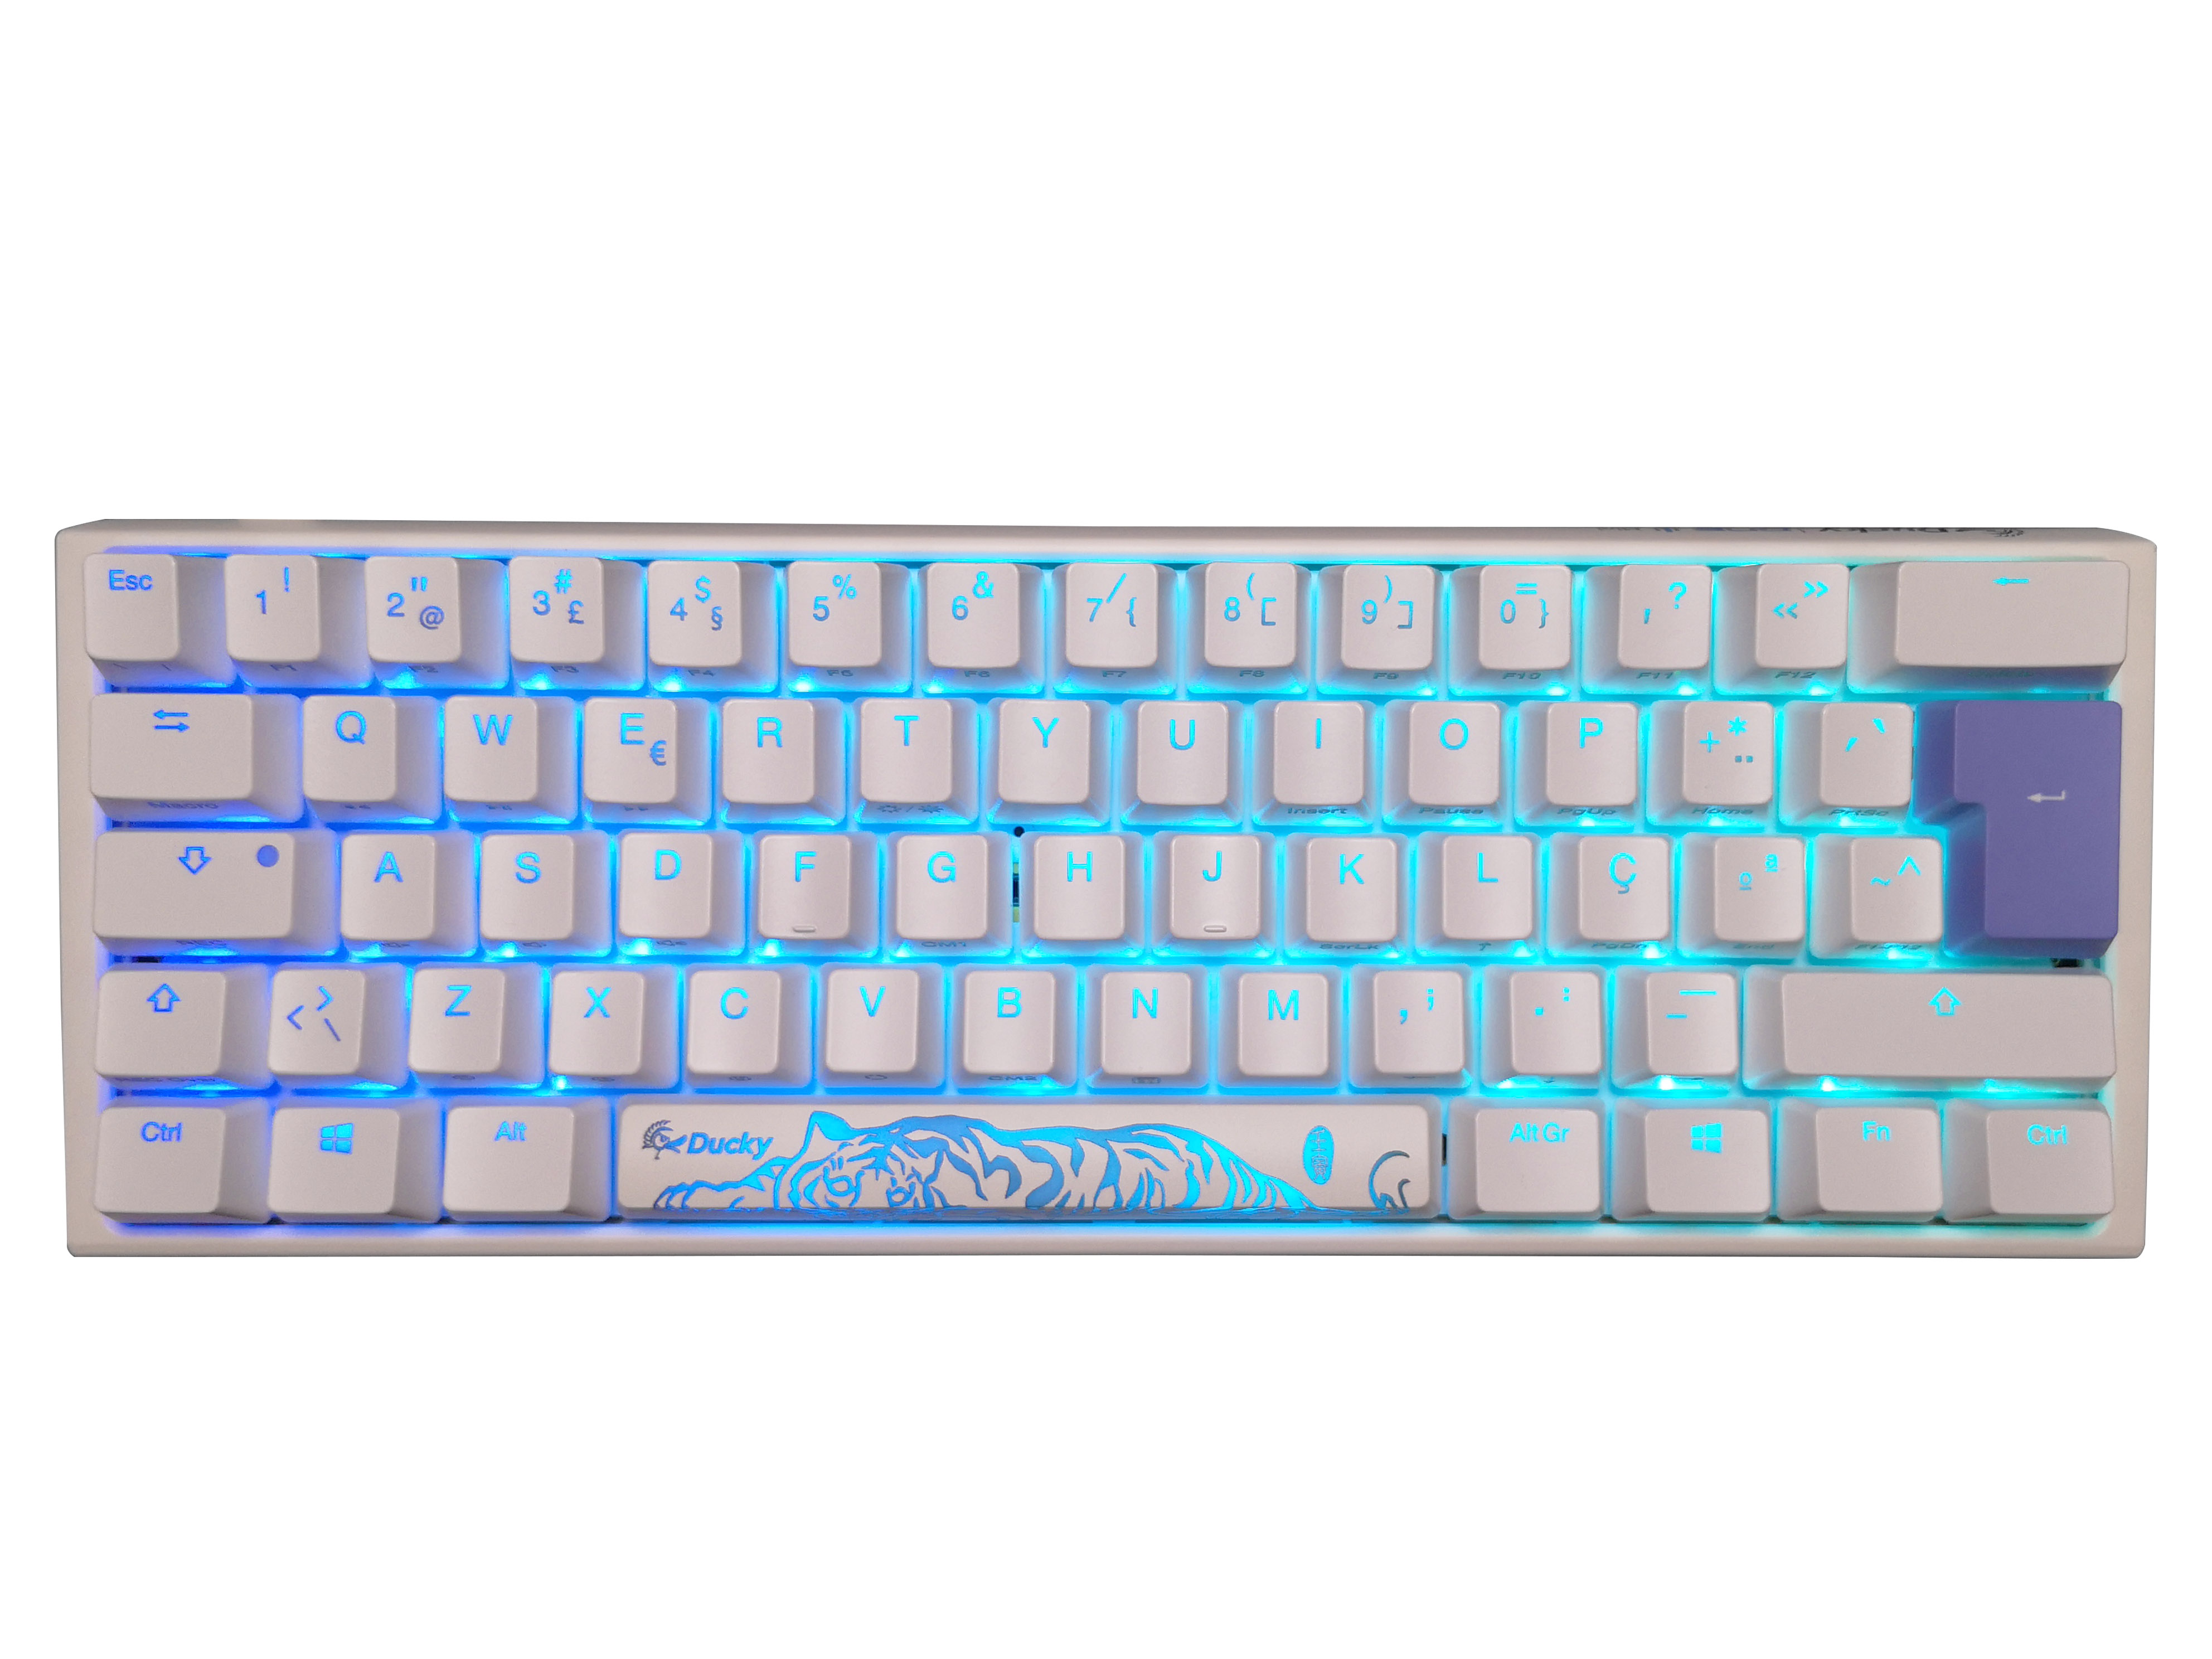 Teclado Ducky ONE 3 Classic Mini 60% Pure White, Hot-swappable, MX-Red, RGB, PBT - Mecânico (PT)